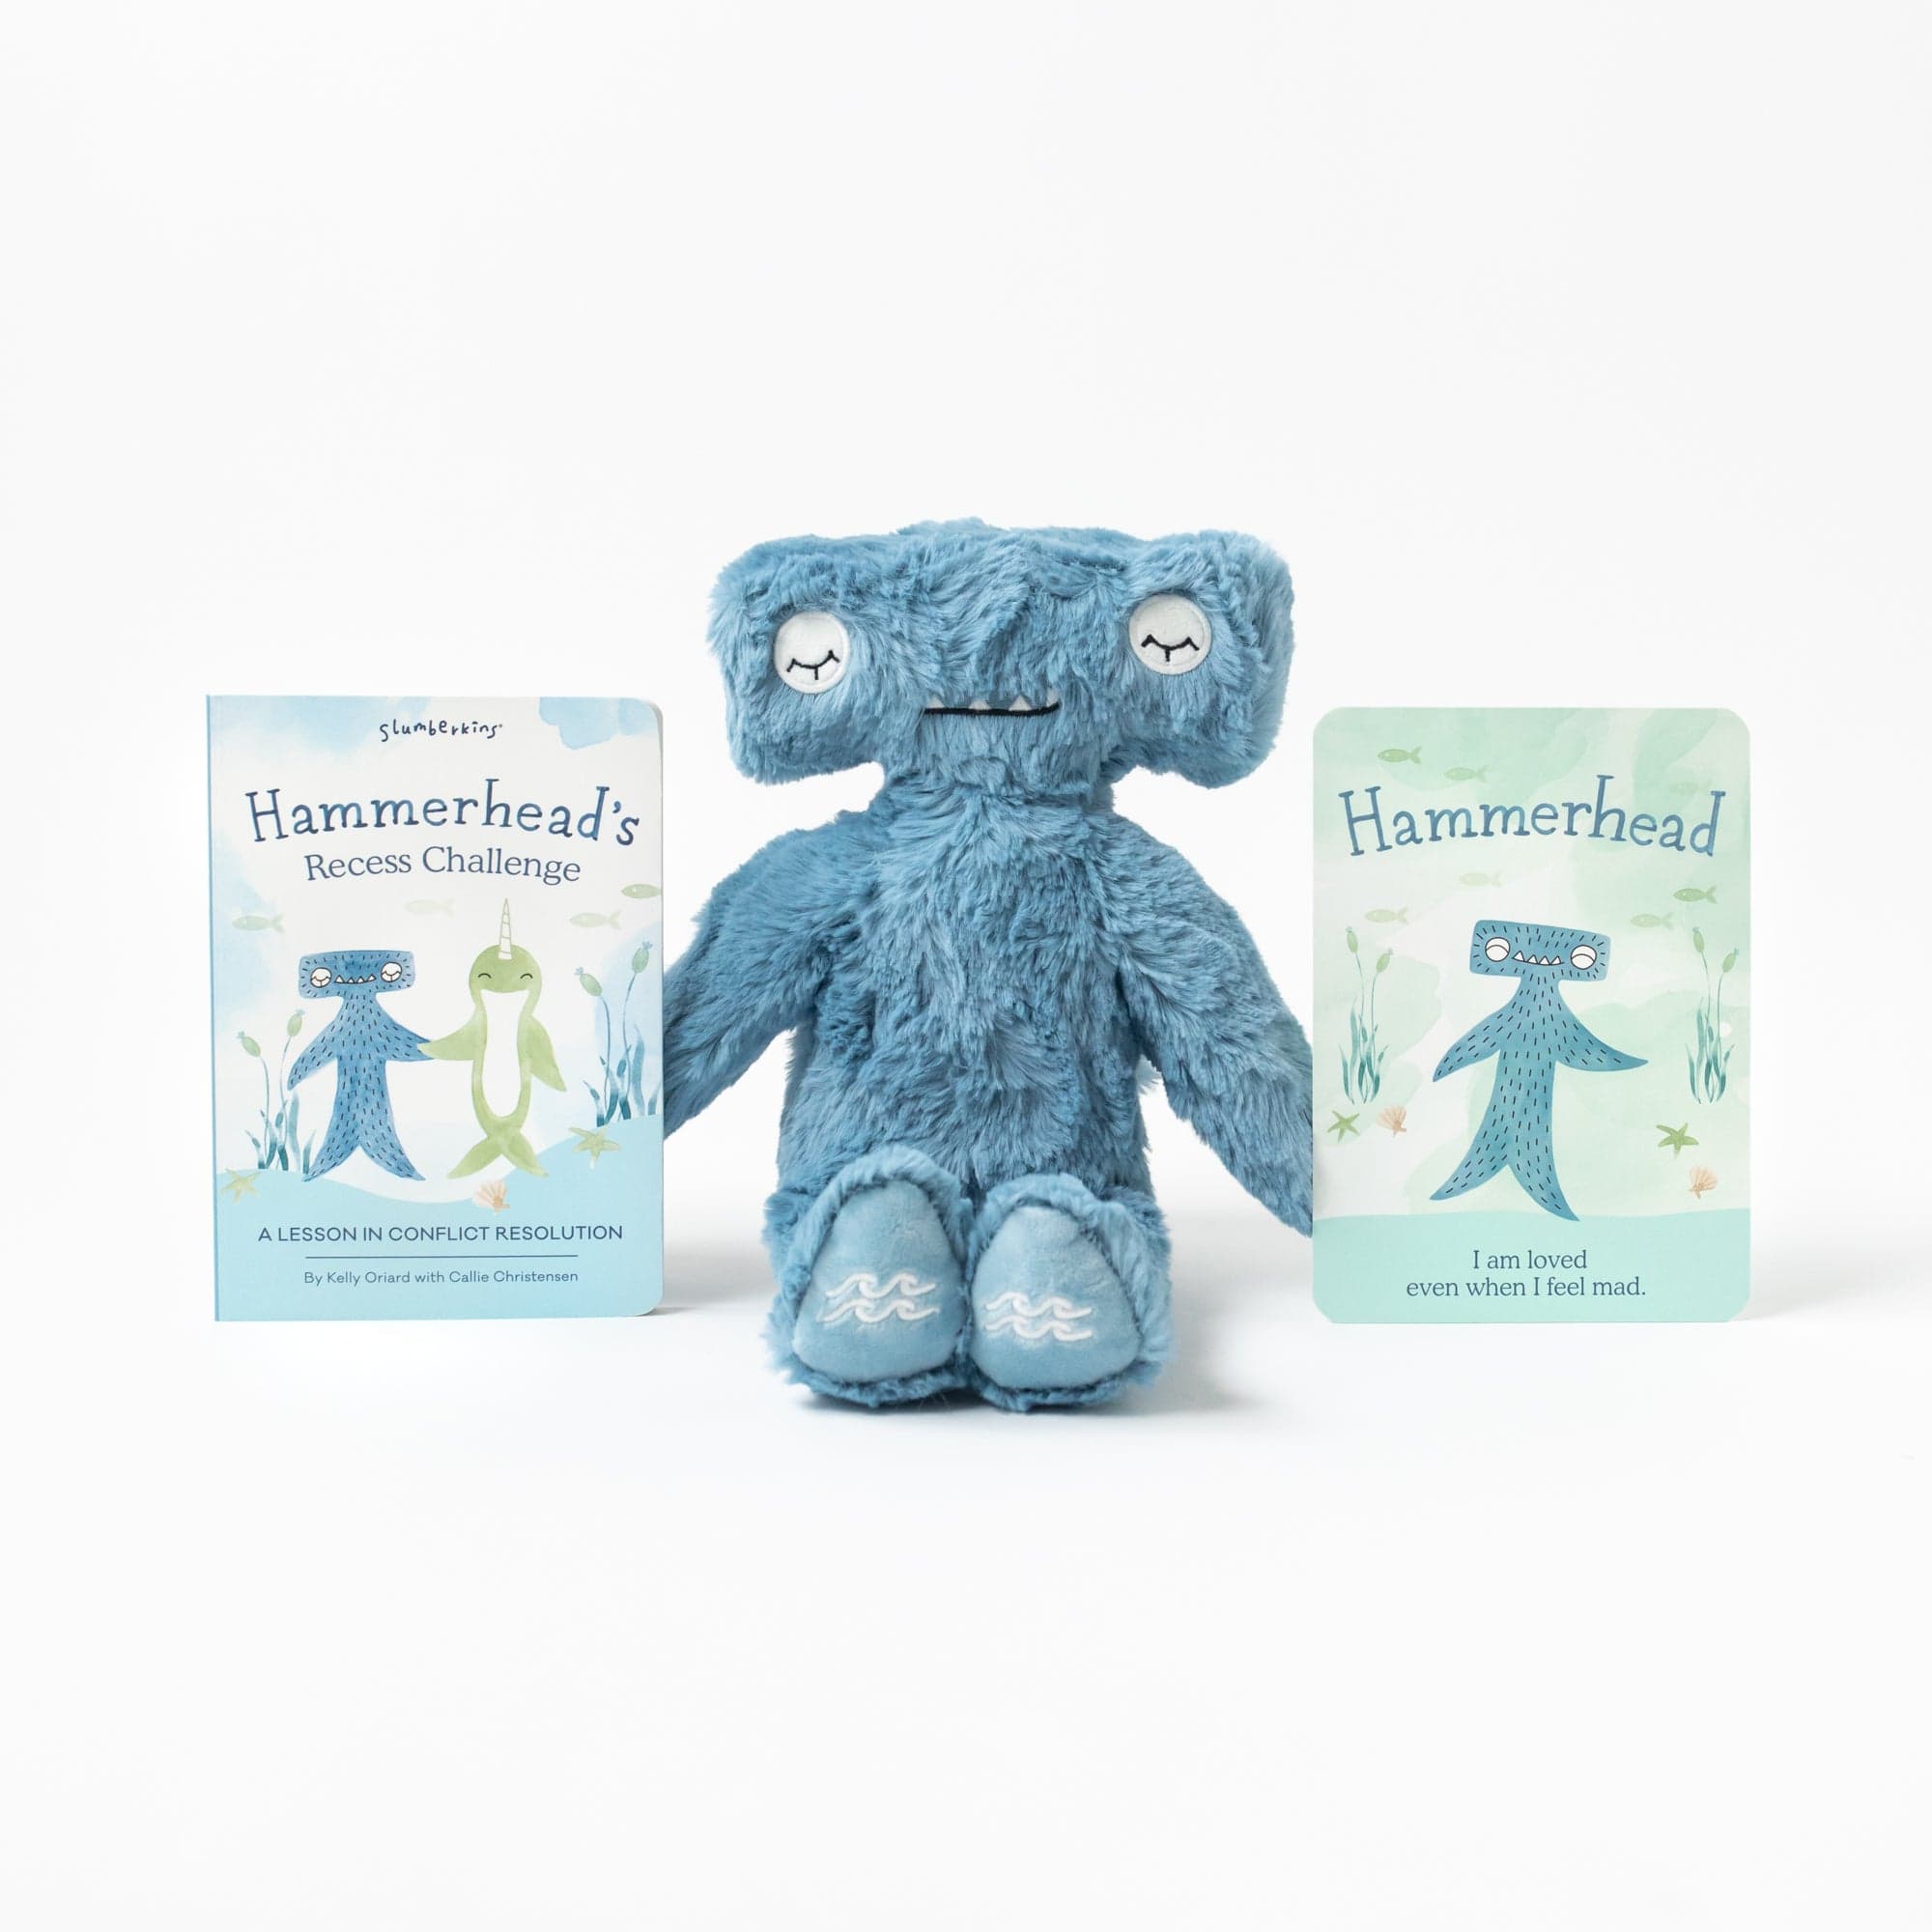 Hammerhead Stuffed Animal with Hammerhead's Recess Challenge Board Book and An Affirmation card supporting conflict resolution - View Product